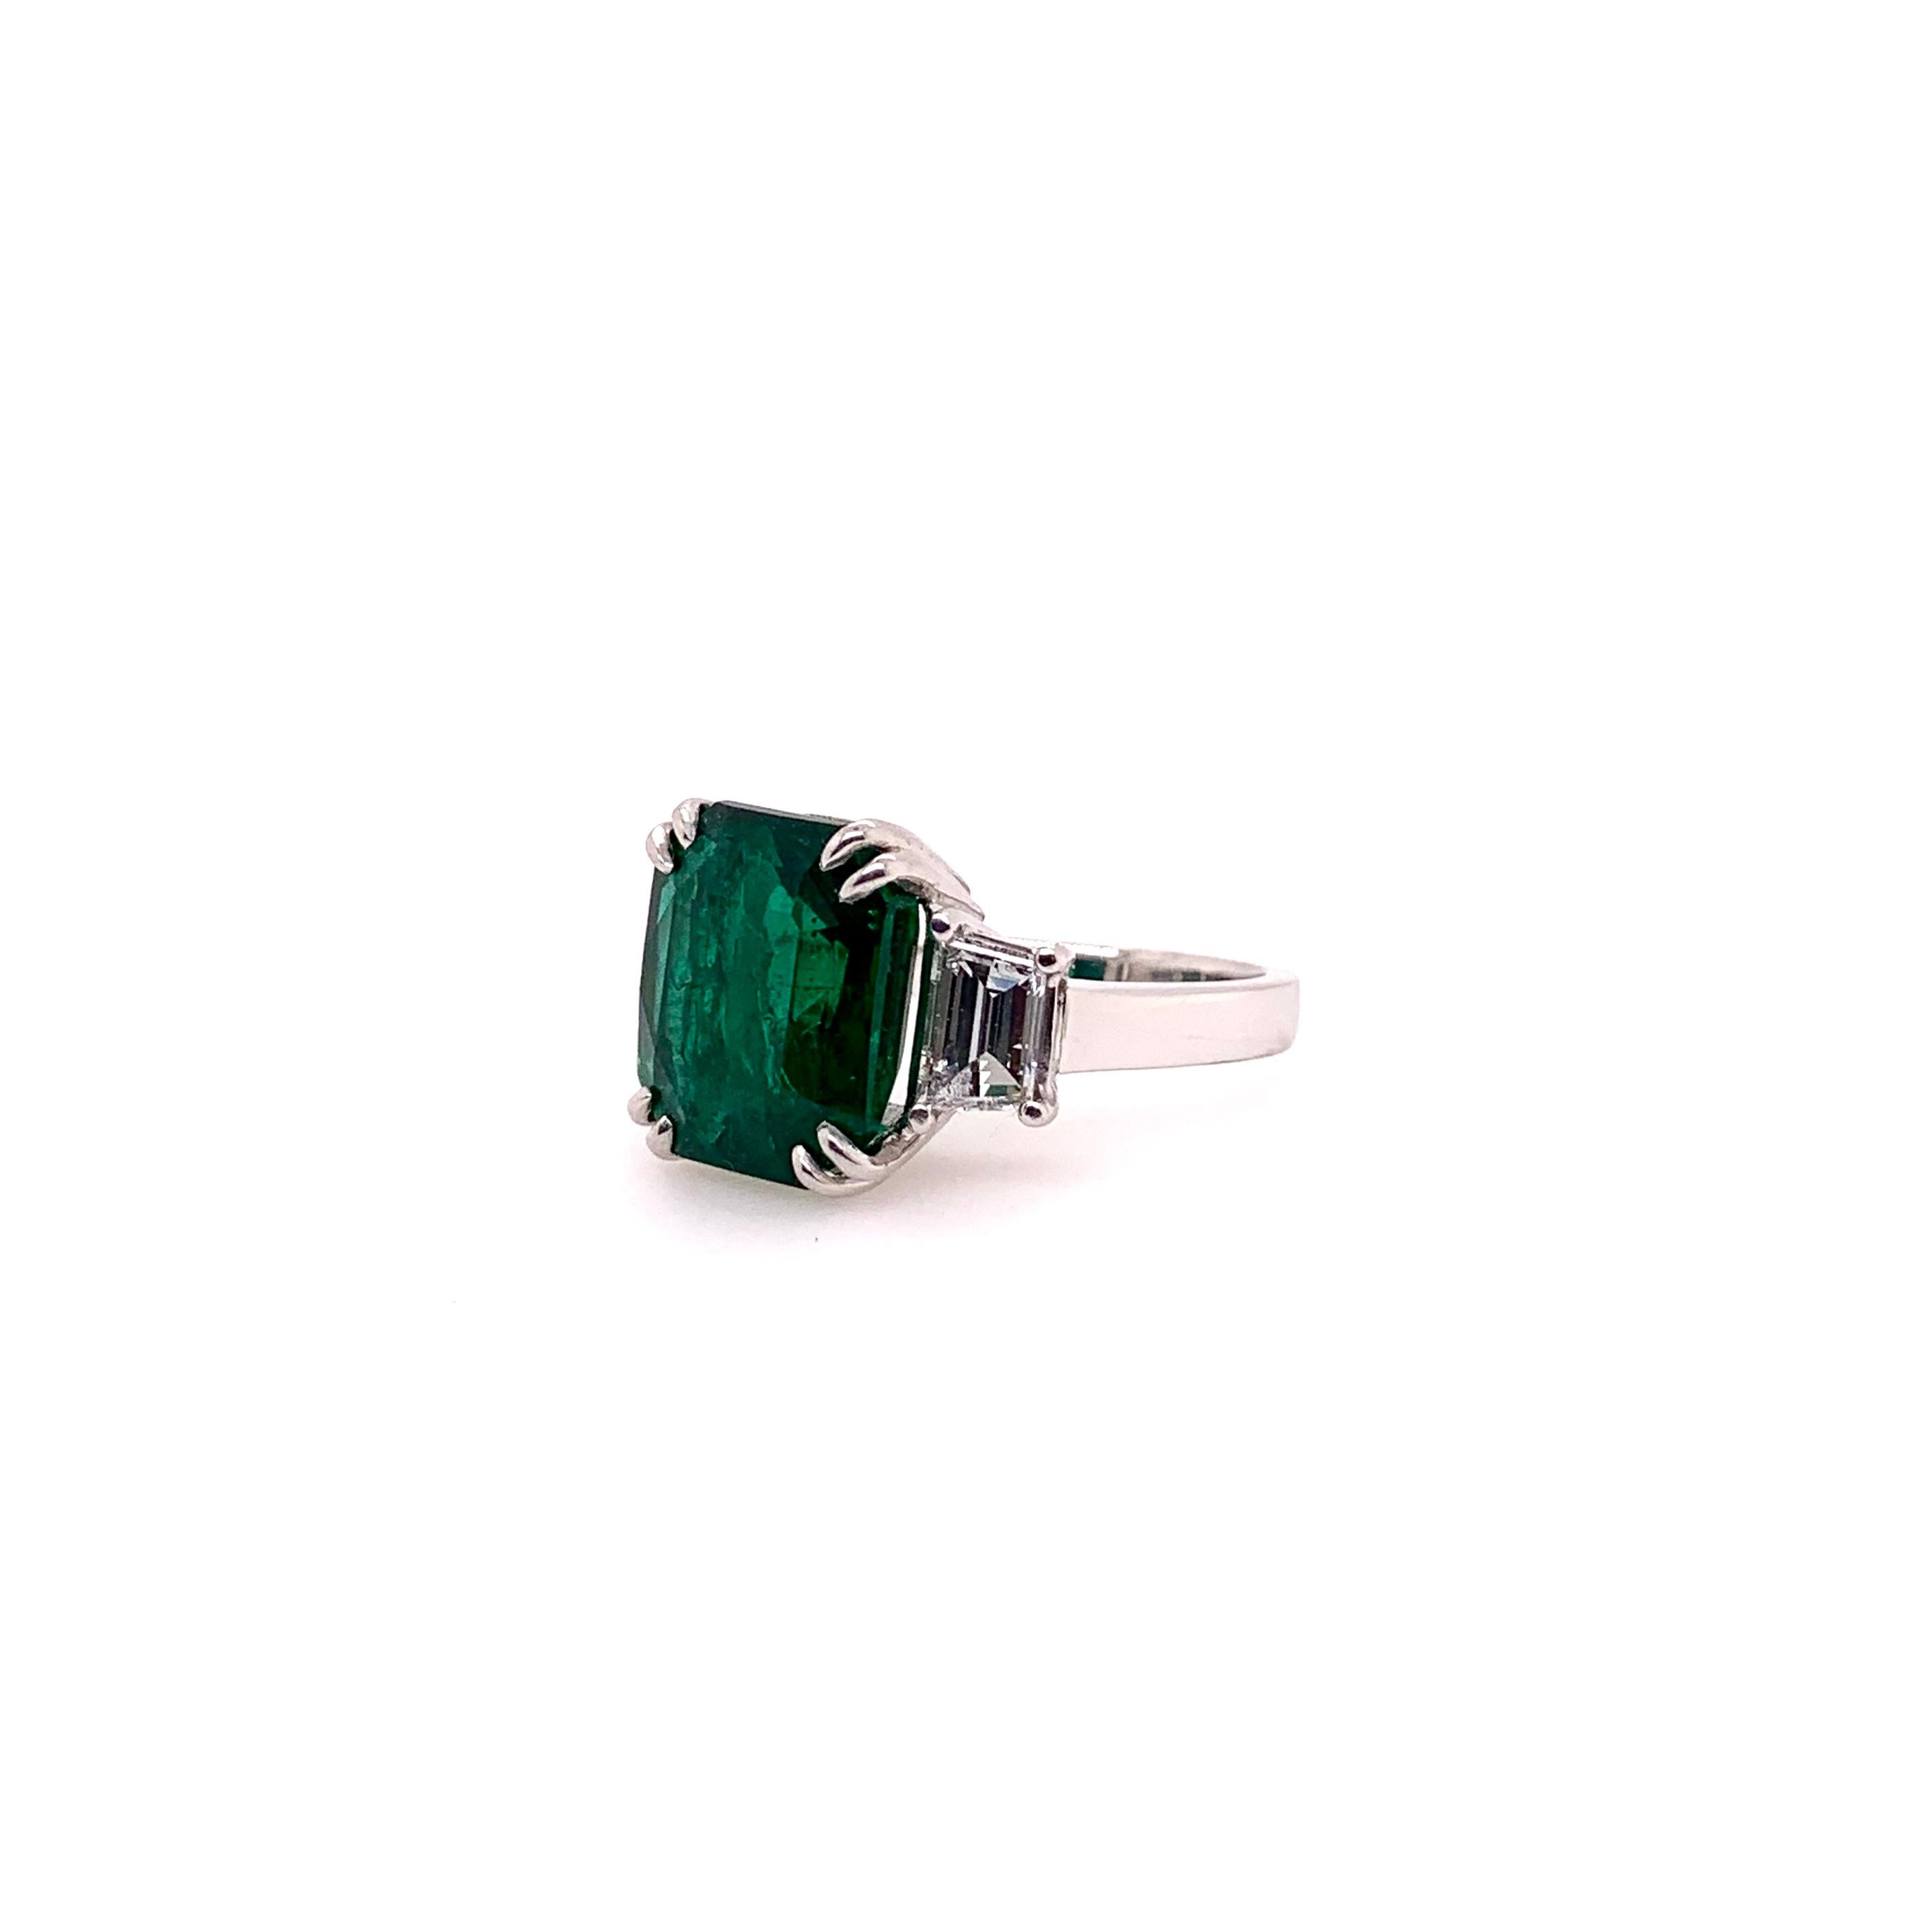 An iconic 3 stone emerald ring with gorgeous trapezoid cut diamonds on the side in a handmade platinum setting!   The 7.68 carat emerald is GIA certified and the trapezoid diamonds weigh 1.20 carats total weight.   This stunning 3 stone ring will be